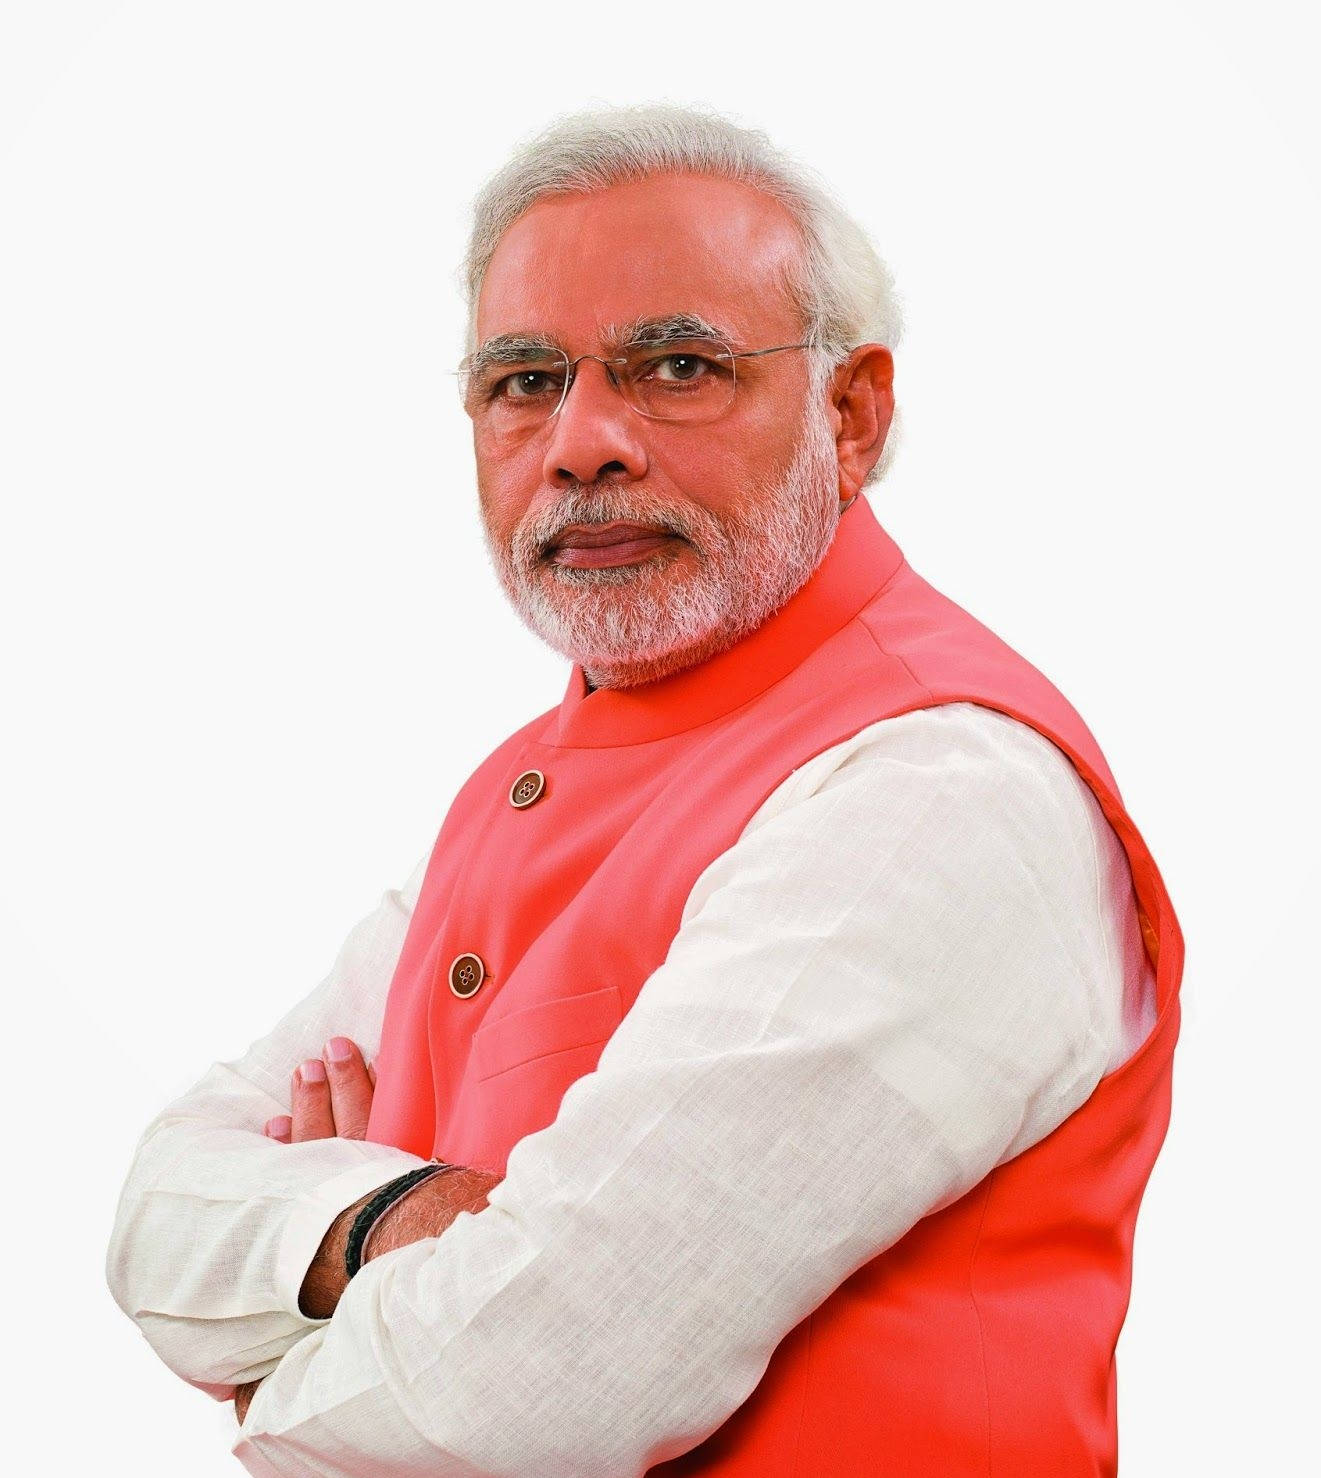 78988 Narendra Modi Photos and Premium High Res Pictures  Getty Images